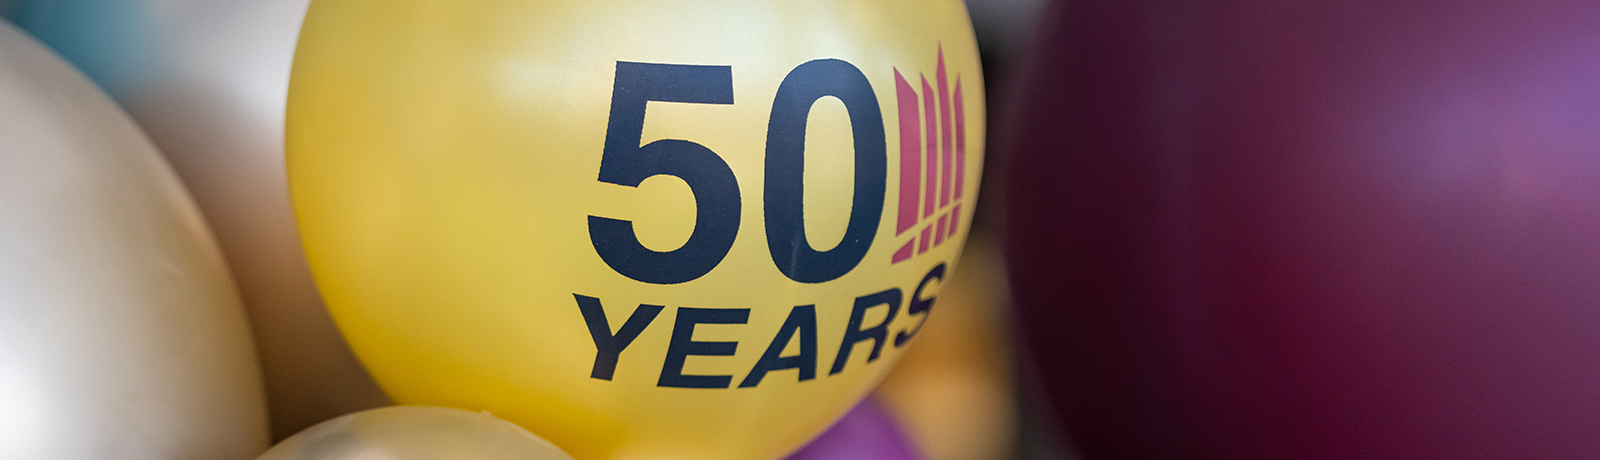 Balloons with 50th anniversary logo